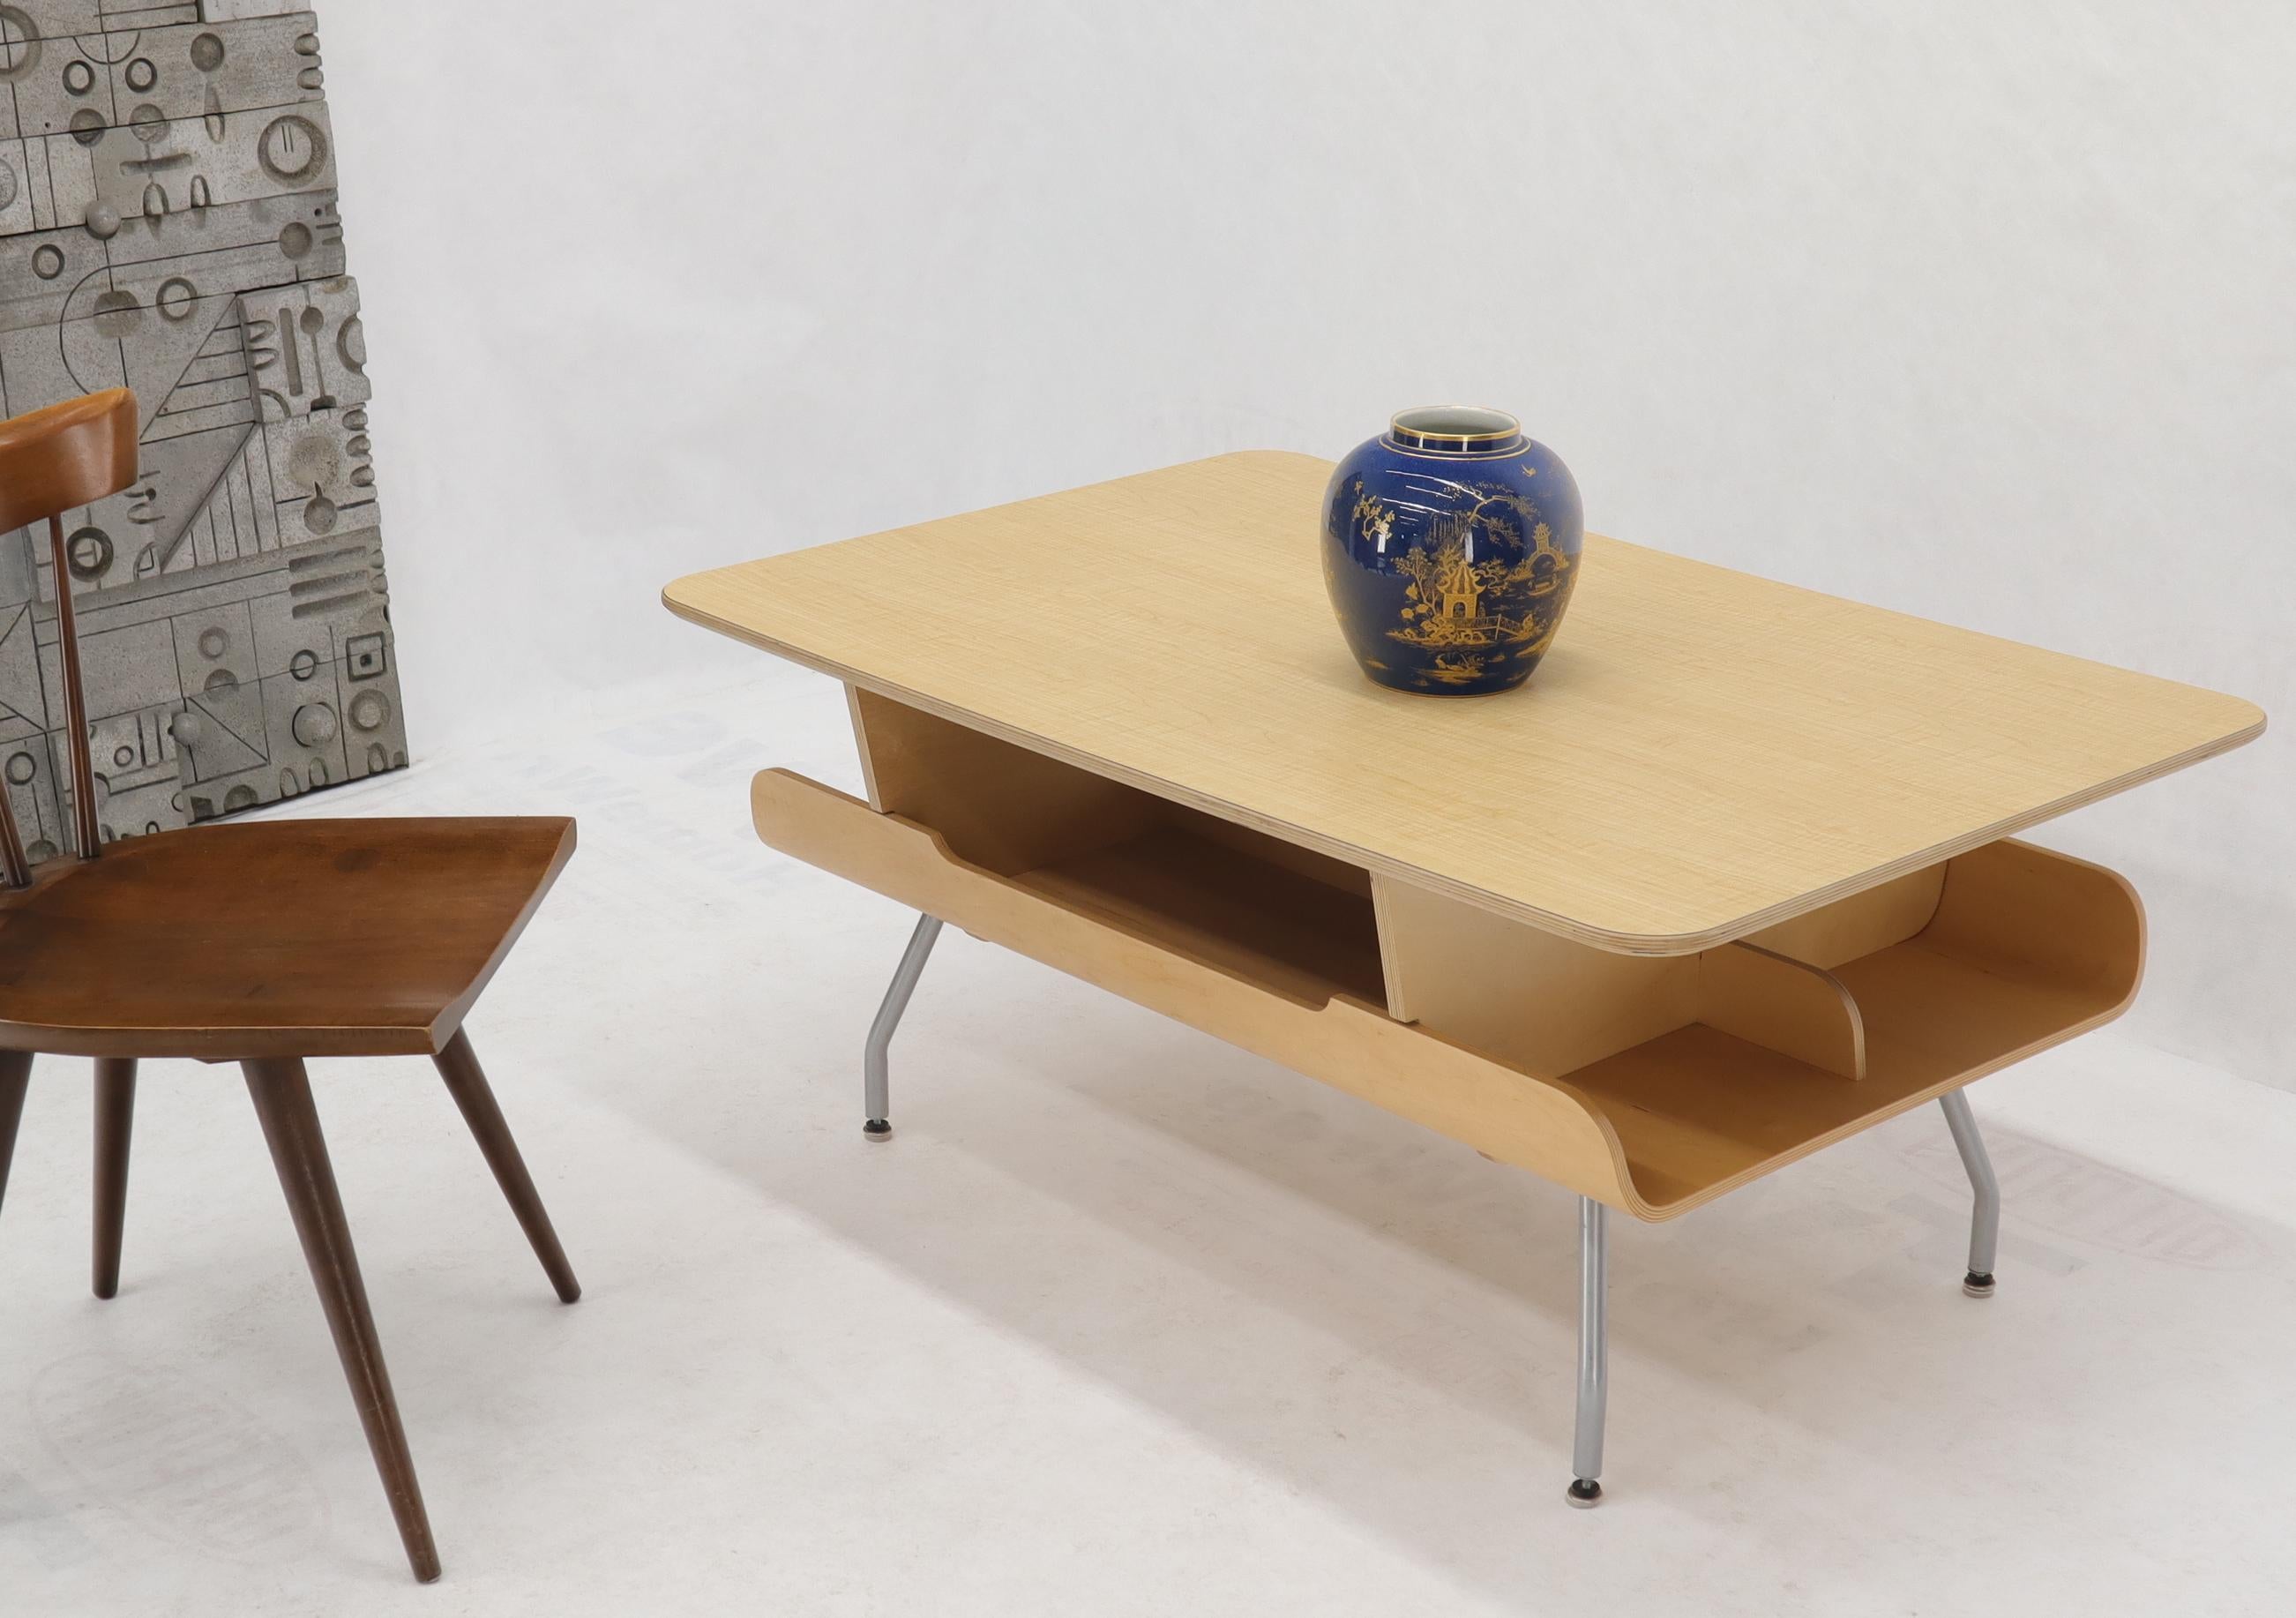 Mid-Century Modern Herman Miller molded plywood bent tube legs coffee table with substantial magazine rack bookcase by Herman Miller.